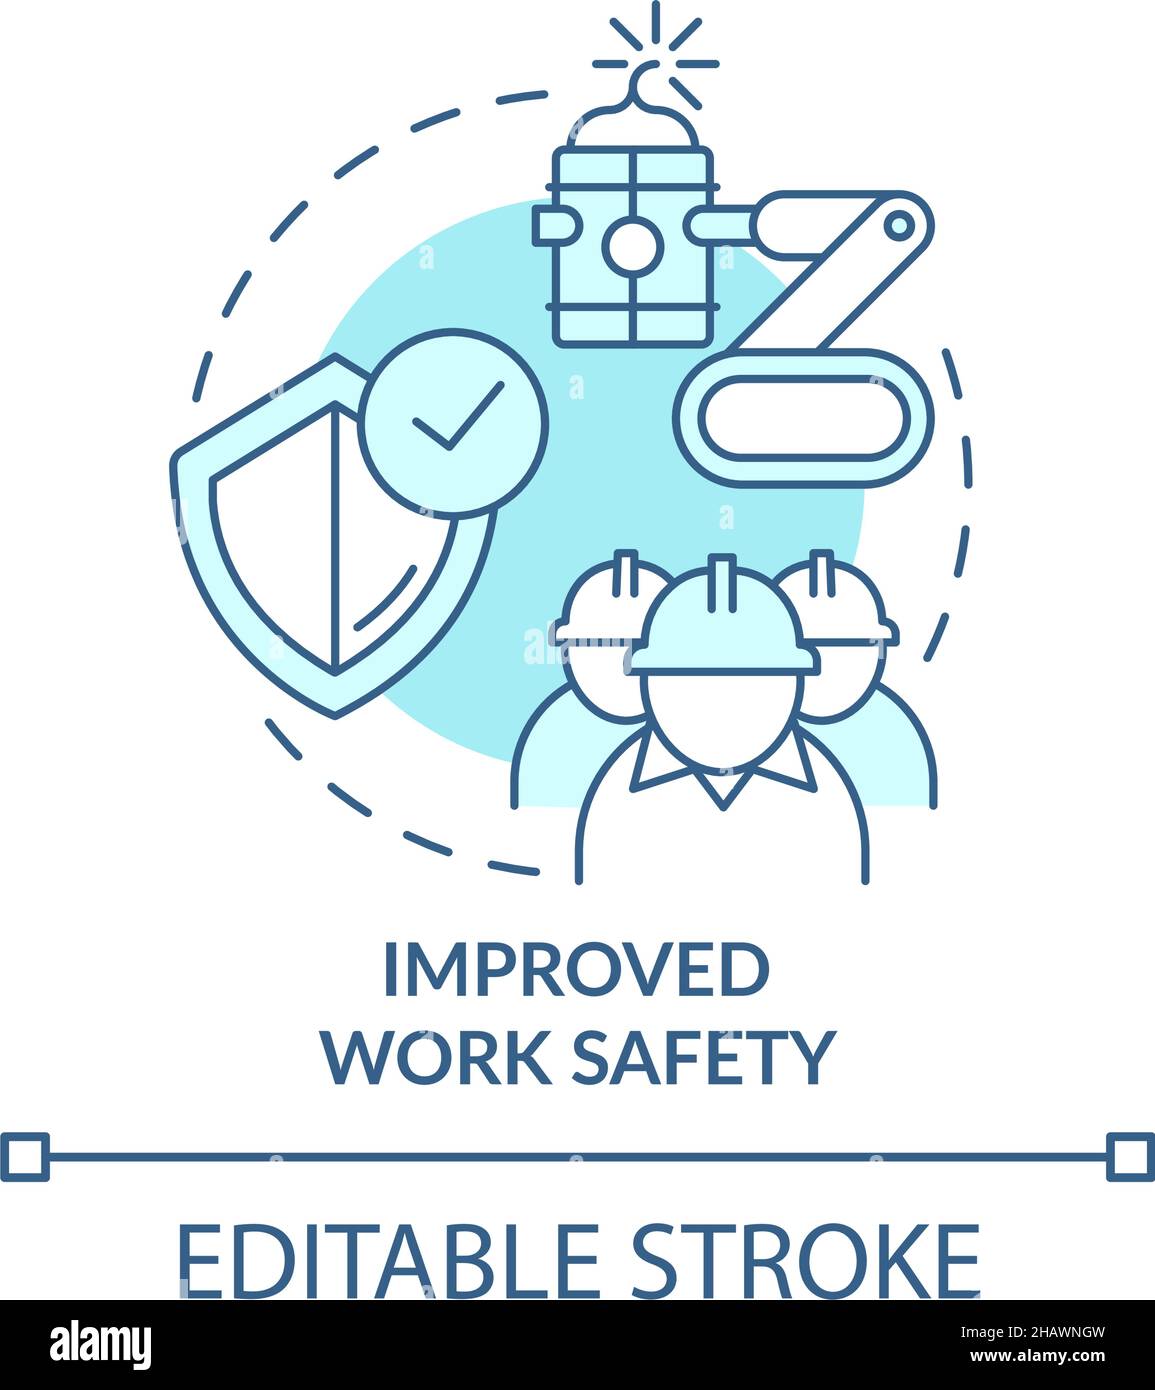 Improved work safety blue concept icon Stock Vector